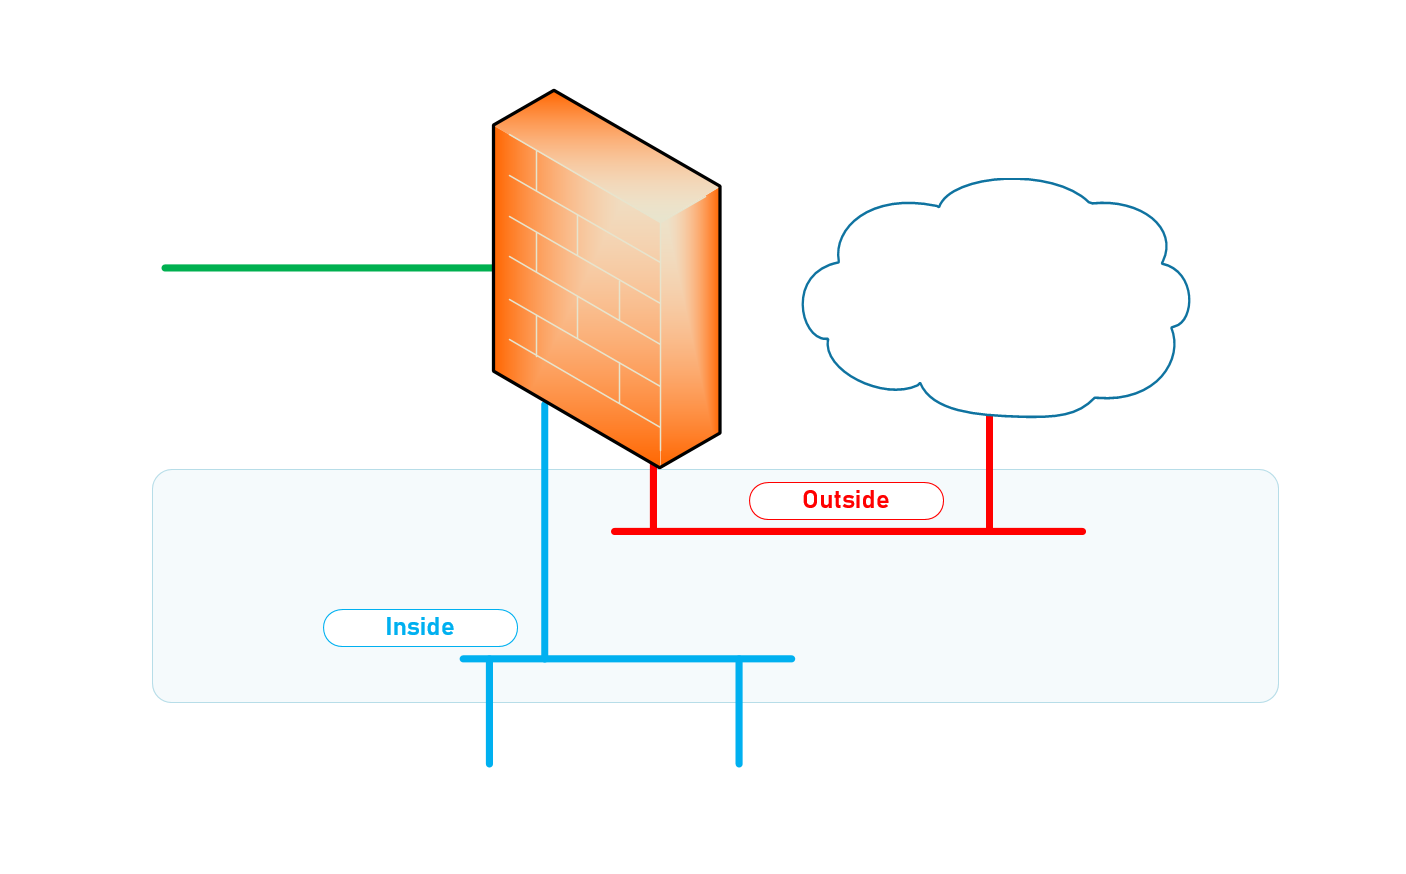 Identify the Interface on your firewall dedicated for your LAN Network